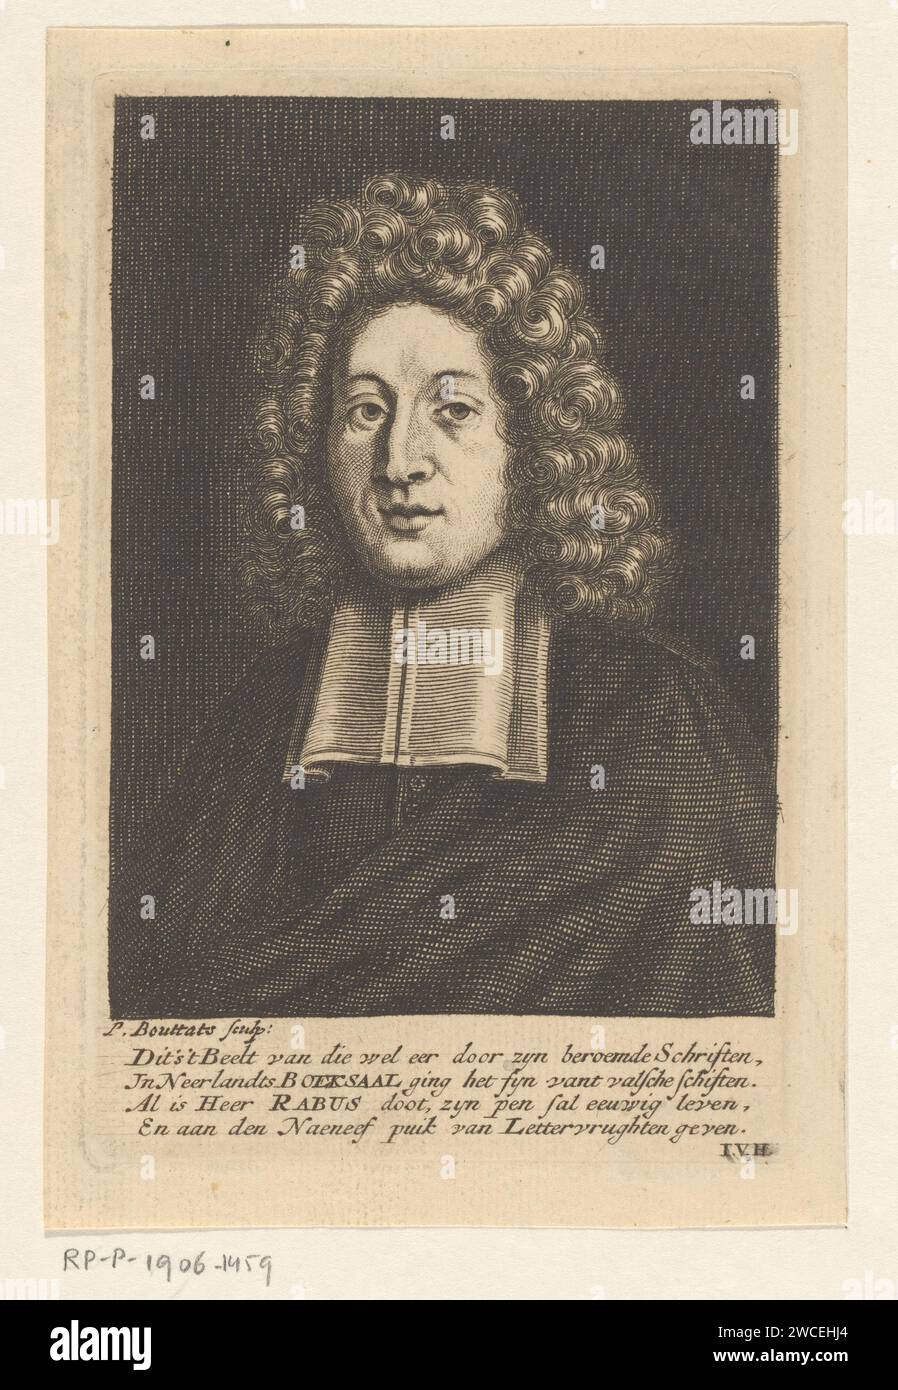 Portrait of Pieter Rabus, Philibert Bouttats, After 1702 - 1731 print Portrait of the Dutch writer and poet Pieter Rabus. Bust to the left. Rabus is wearing a gown. With Dutch caption: '' This is the image of that honor because of his famous notebooks in Neerlandt's Boeksaal, it went well with 't Valsche Schifts. Although Lord Rabus Doot, his Pen Sal is eternal life and giving the Naeneew  paper engraving historical persons. portrait of a writer Stock Photo